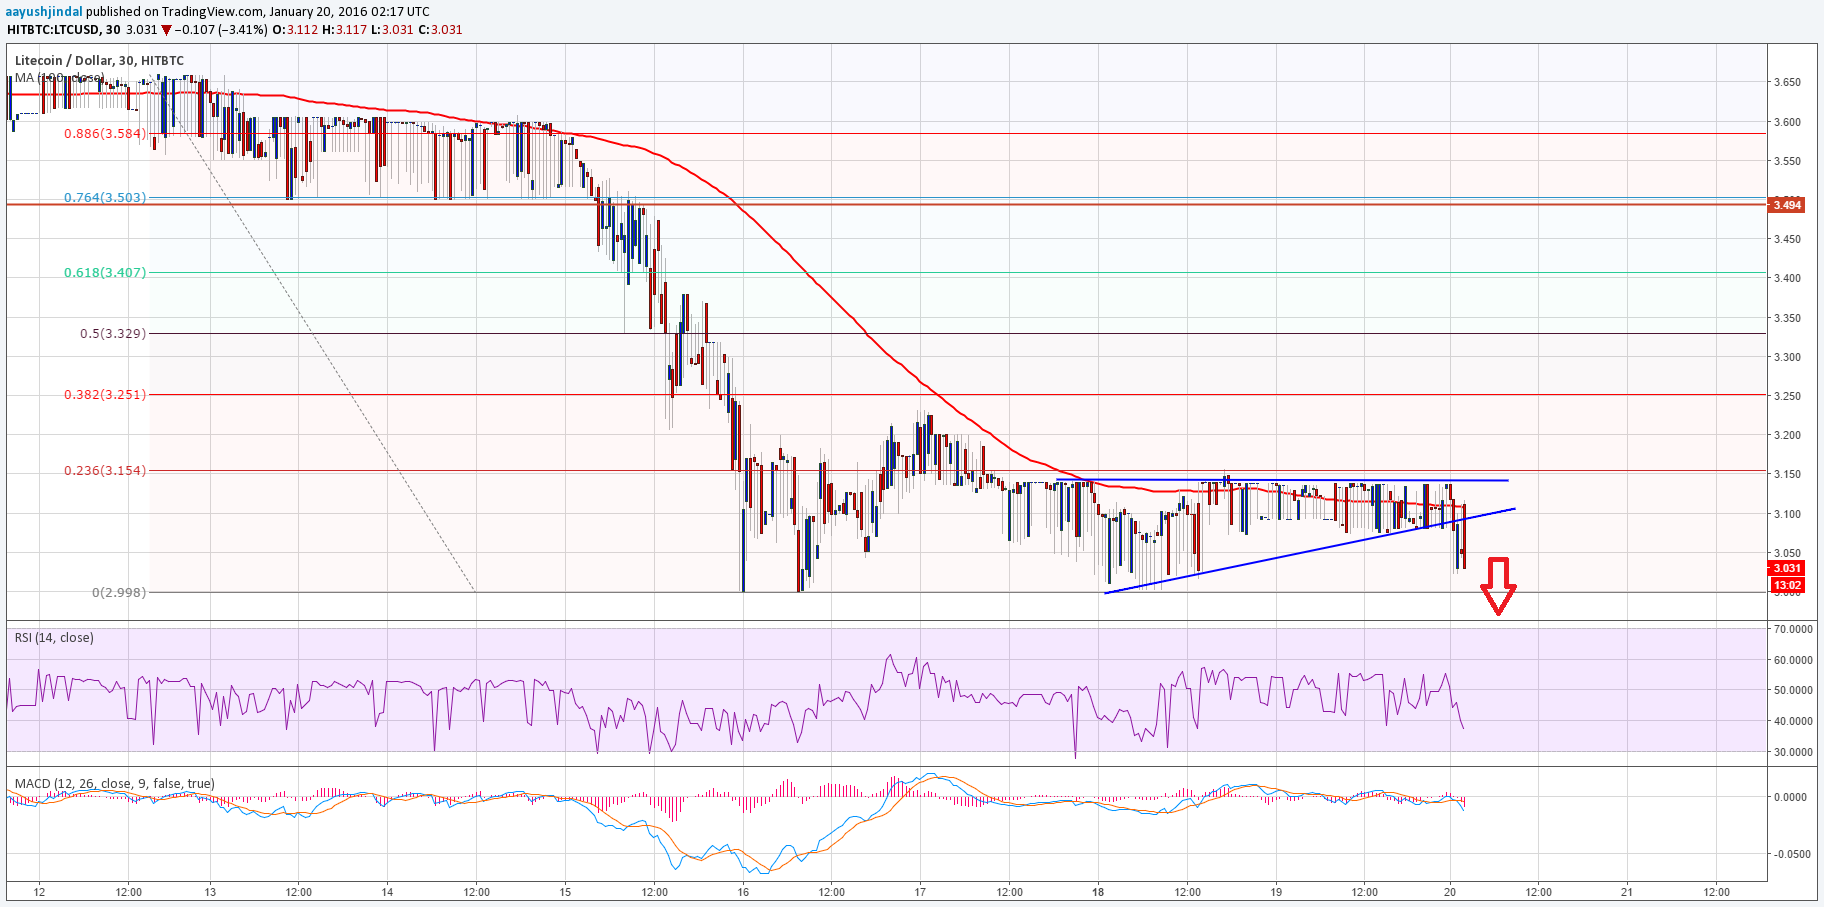 Litecoin Price Technical Analysis – Clear Risk of Further Losses